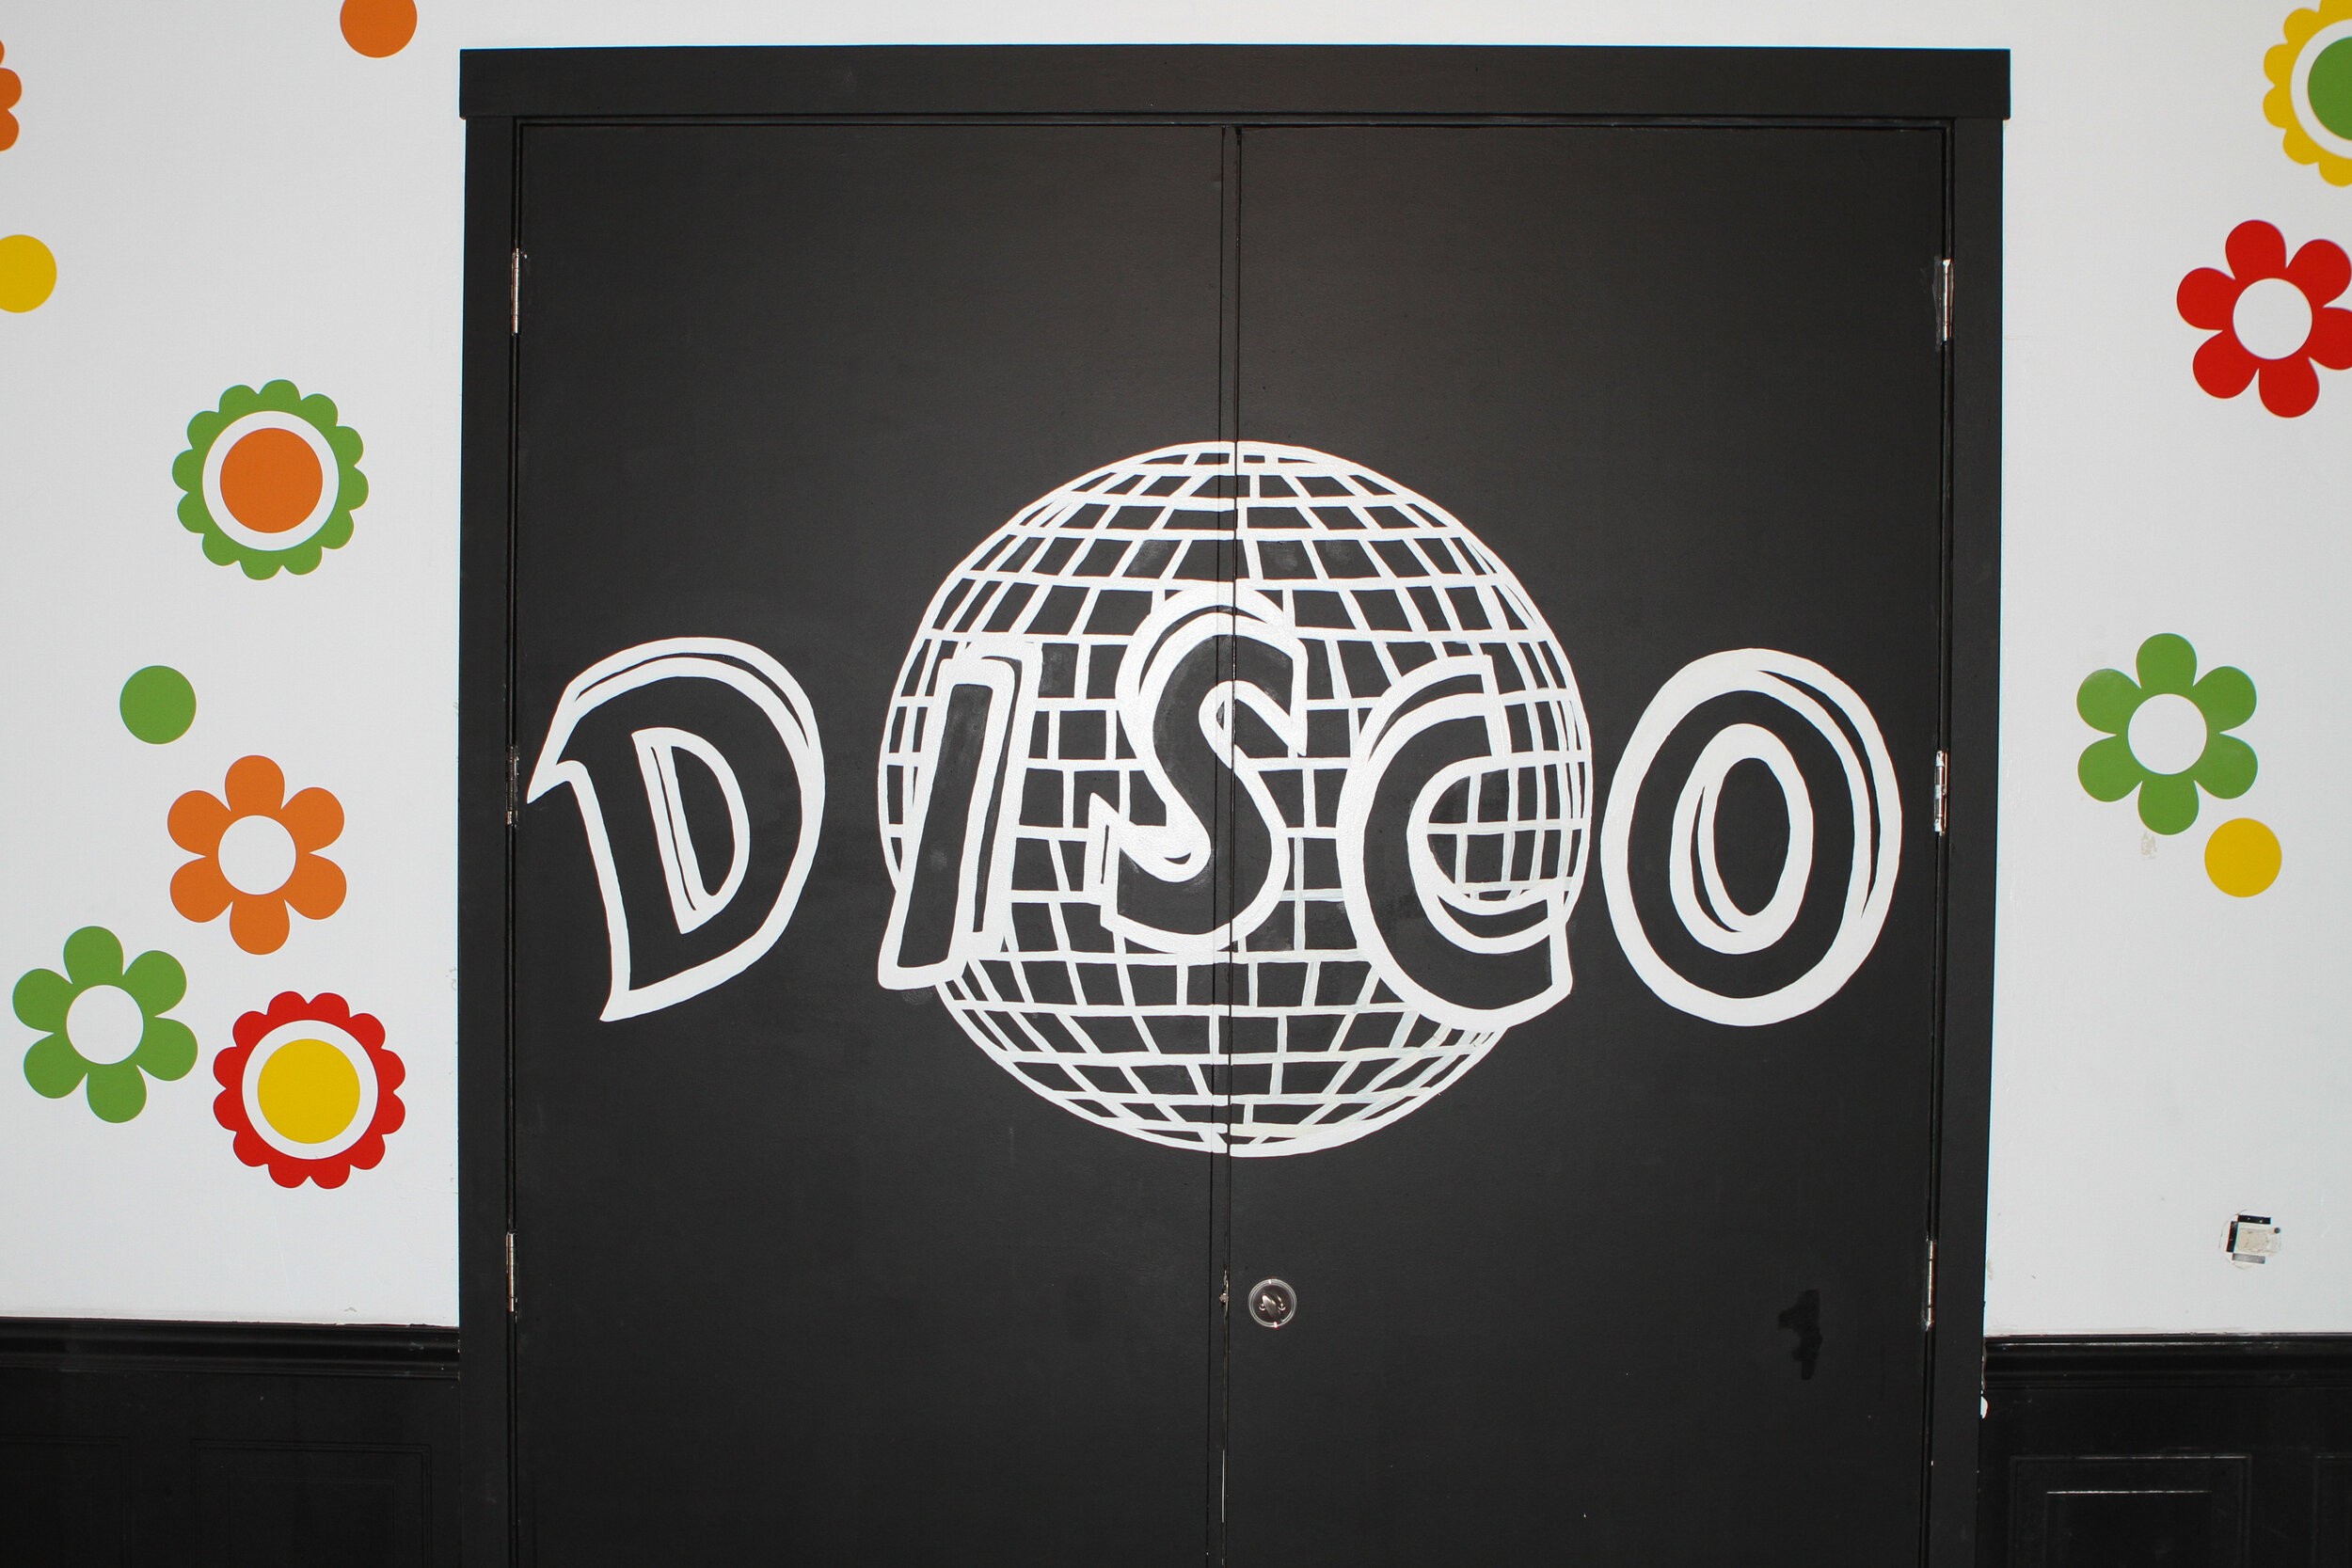  double doors with disco written on them 